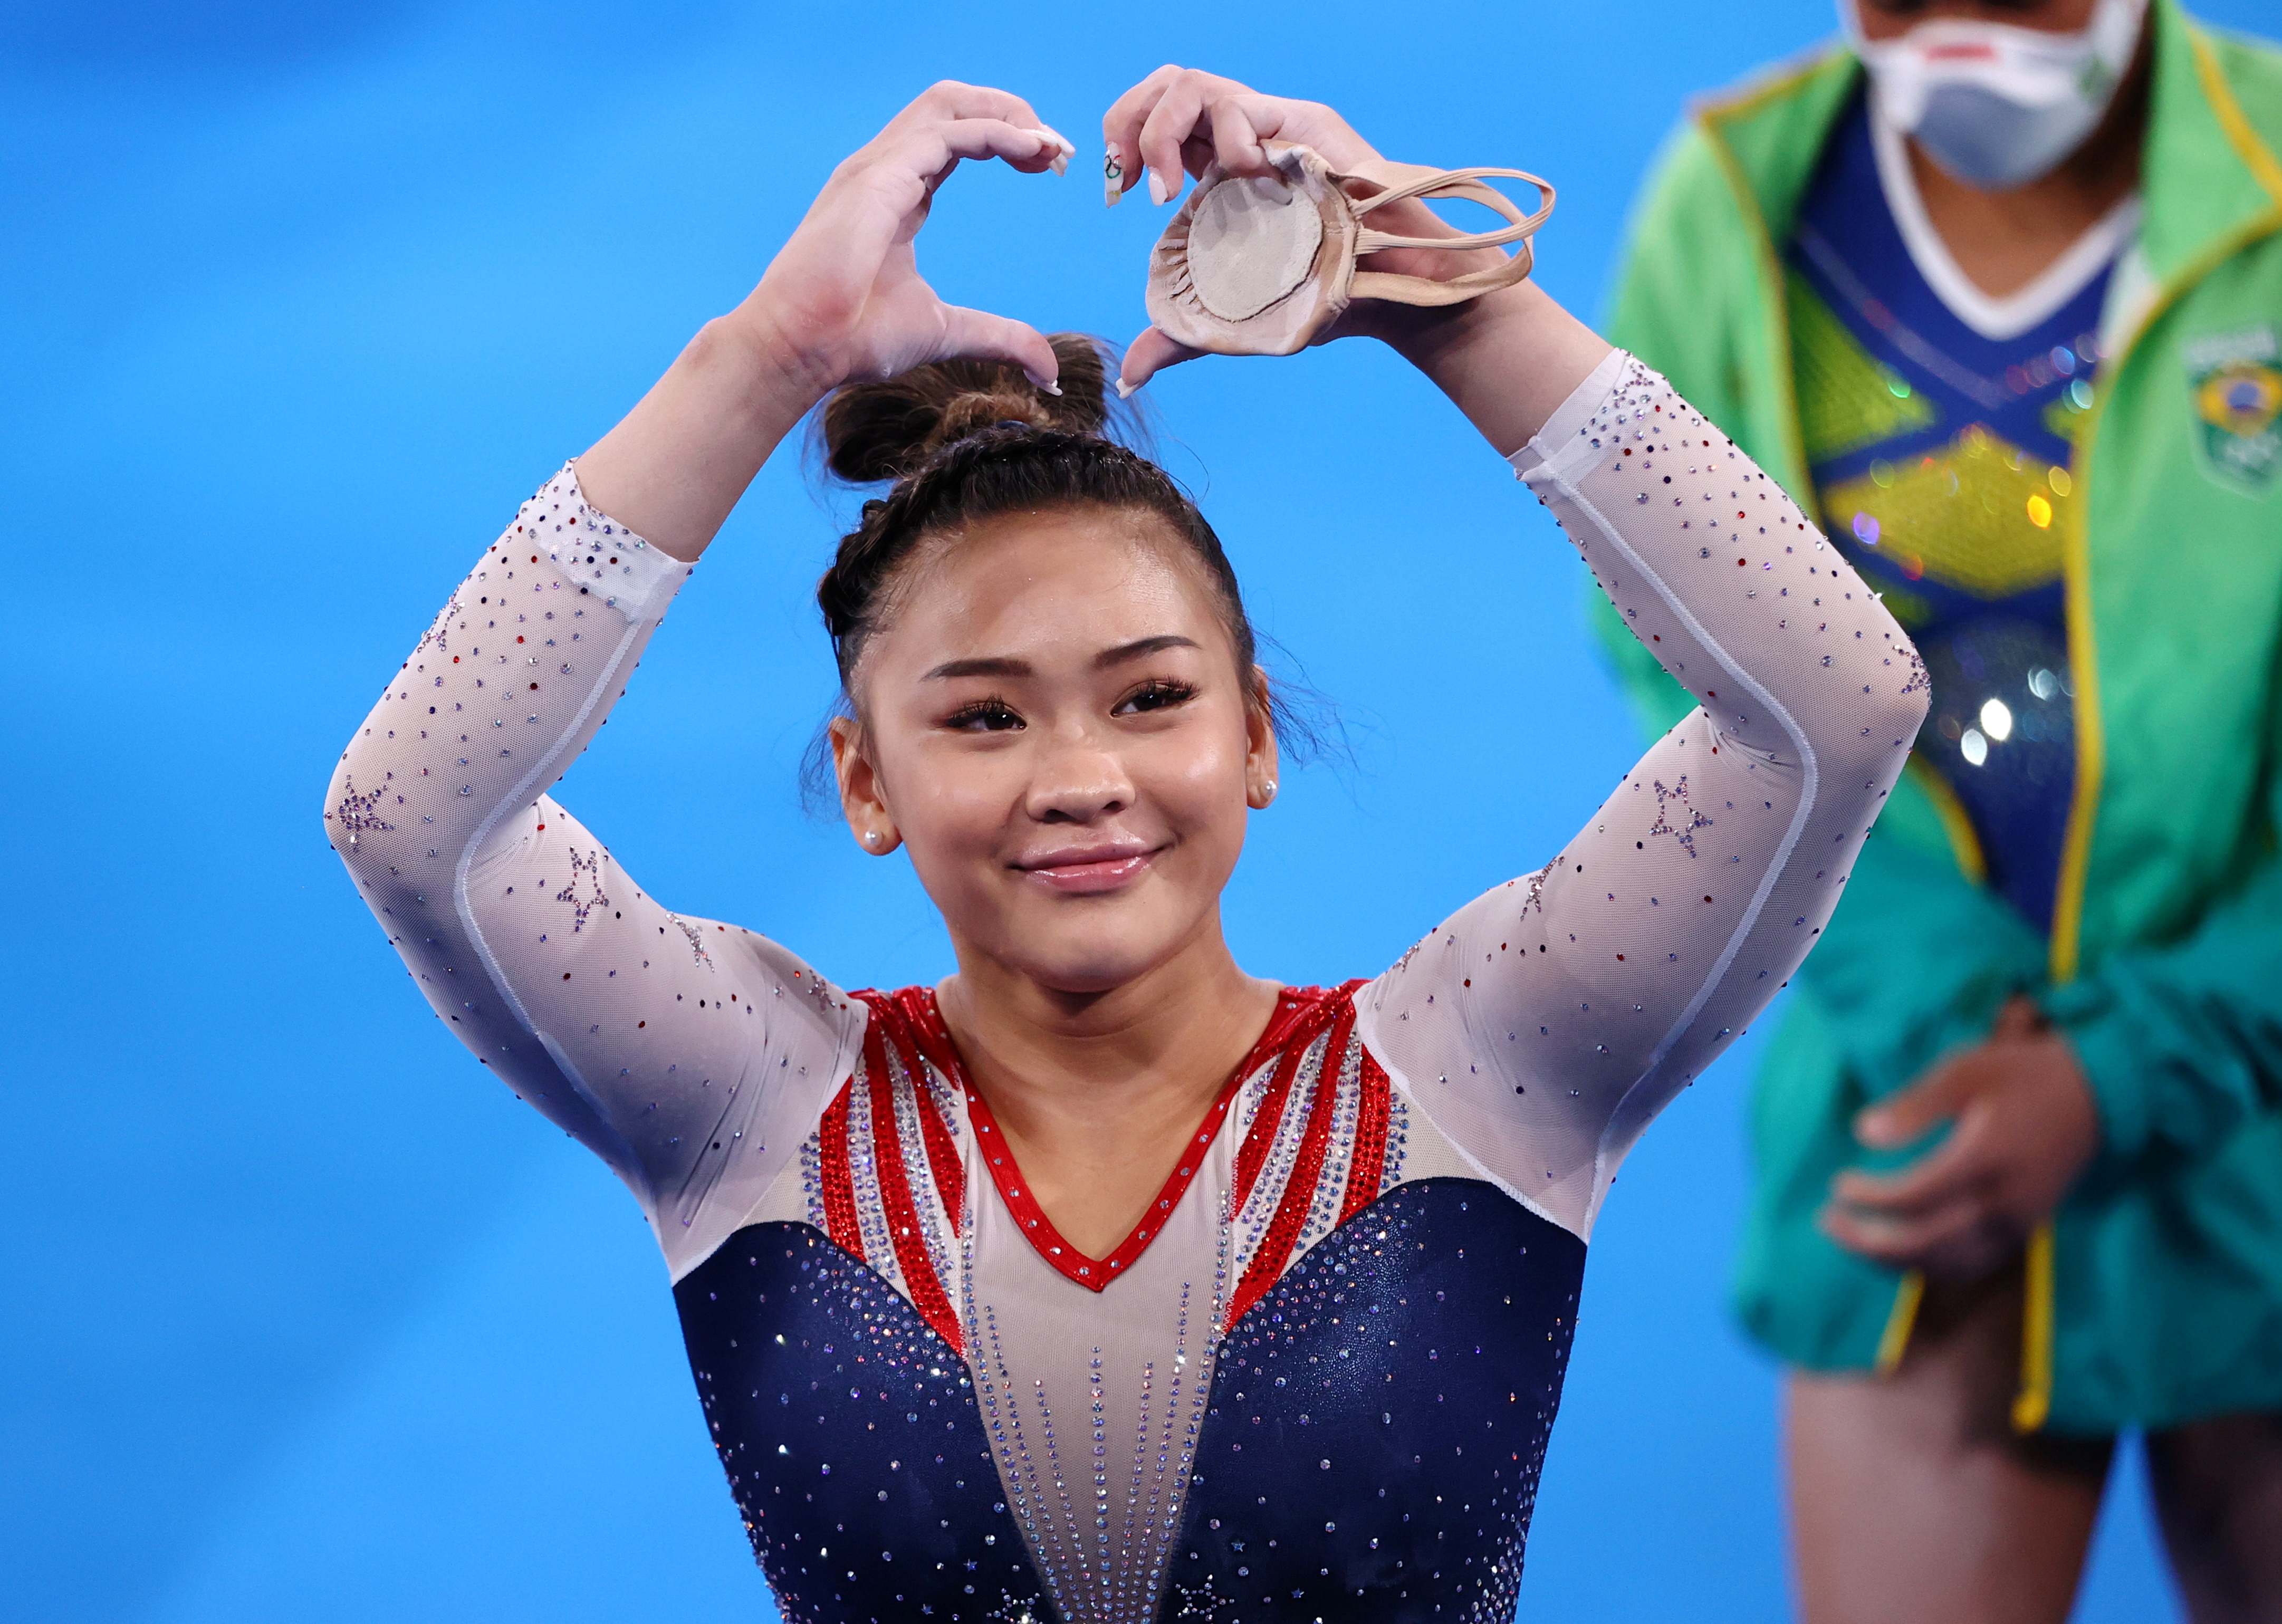 Olympics Gymnastics Usa S Lee Taking Gold Home To Her Father And Hmong Community Reuters